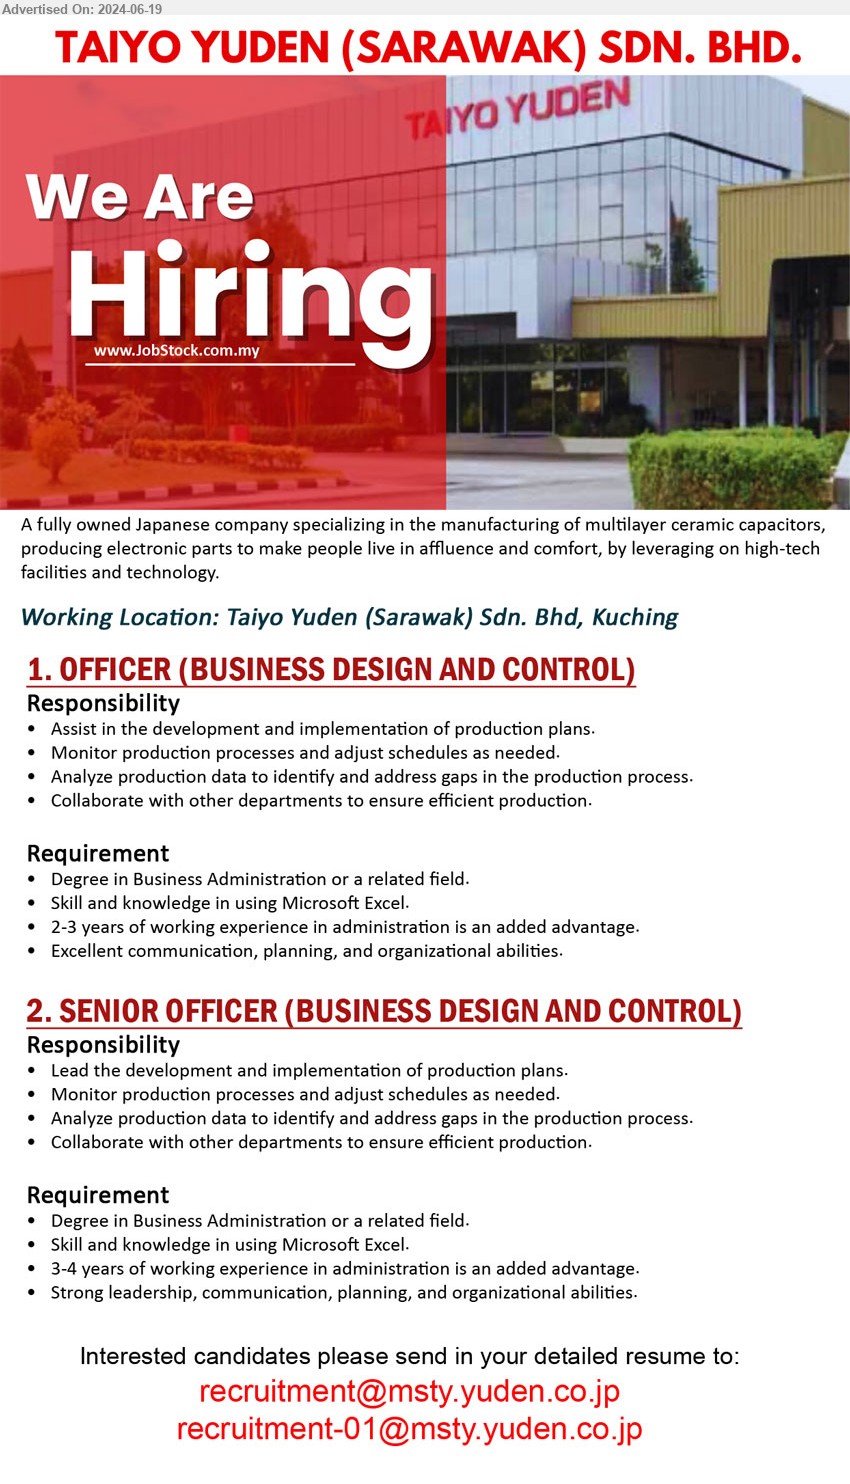 TAIYO YUDEN (SARAWAK) SDN BHD - 1. OFFICER (BUSINESS DESIGN AND CONTROL) (Kuching), Degree in Business Administration, Skill and knowledge in using Microsoft Excel, 2-3 yrs. exp.,...
2. SENIOR OFFICER (BUSINESS DESIGN AND CONTROL) (Kuching), Degree in Business Administration, Skill and knowledge in using Microsoft Excel, 3-4 yrs. exp.,...
Email resume to ...
